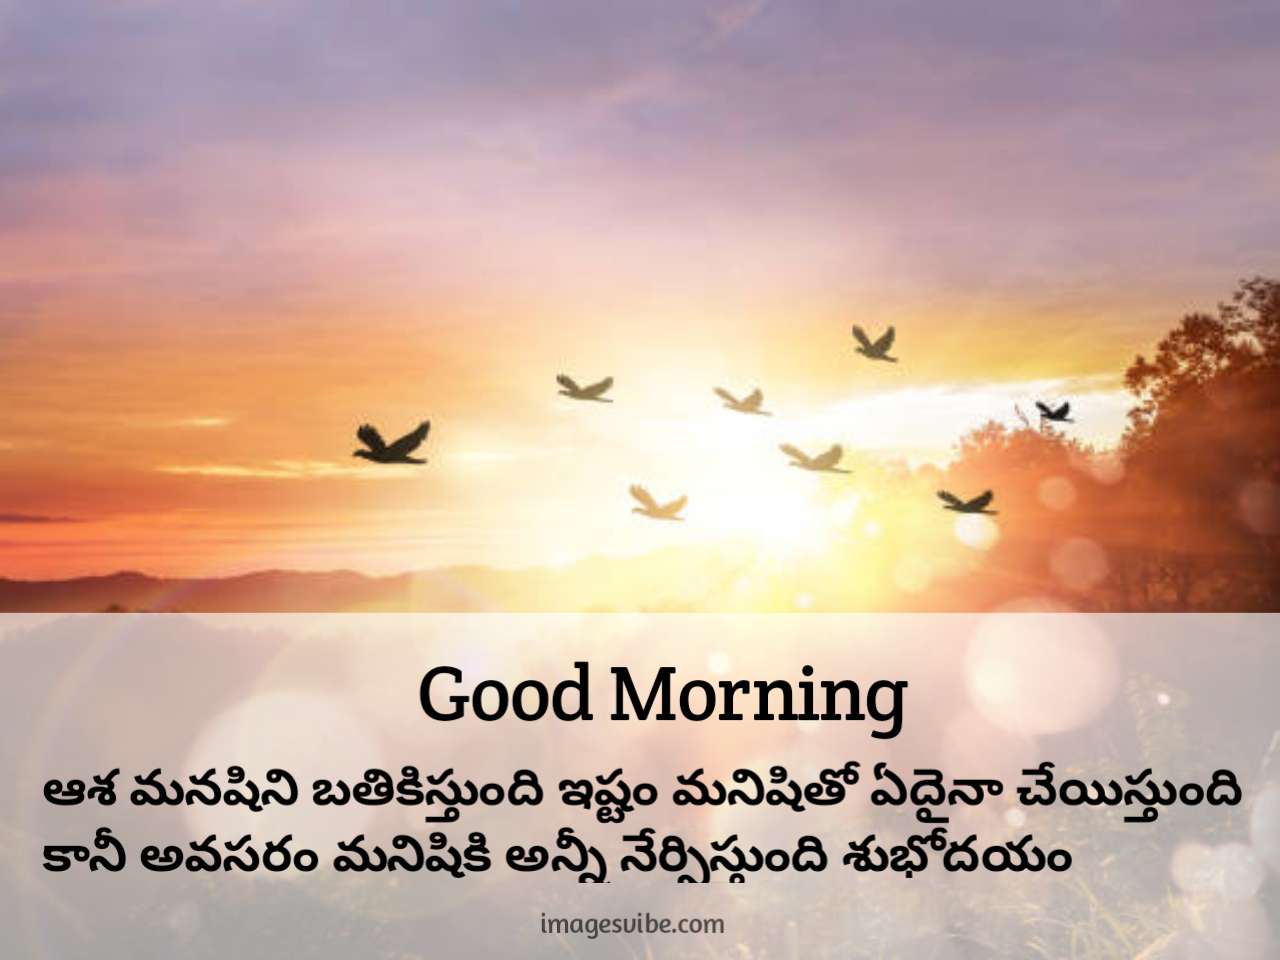 The Ultimate Collection: 999+ Beautiful Good Morning Images in Telugu – Stunning Full 4K Quality Good Morning Images in Telugu